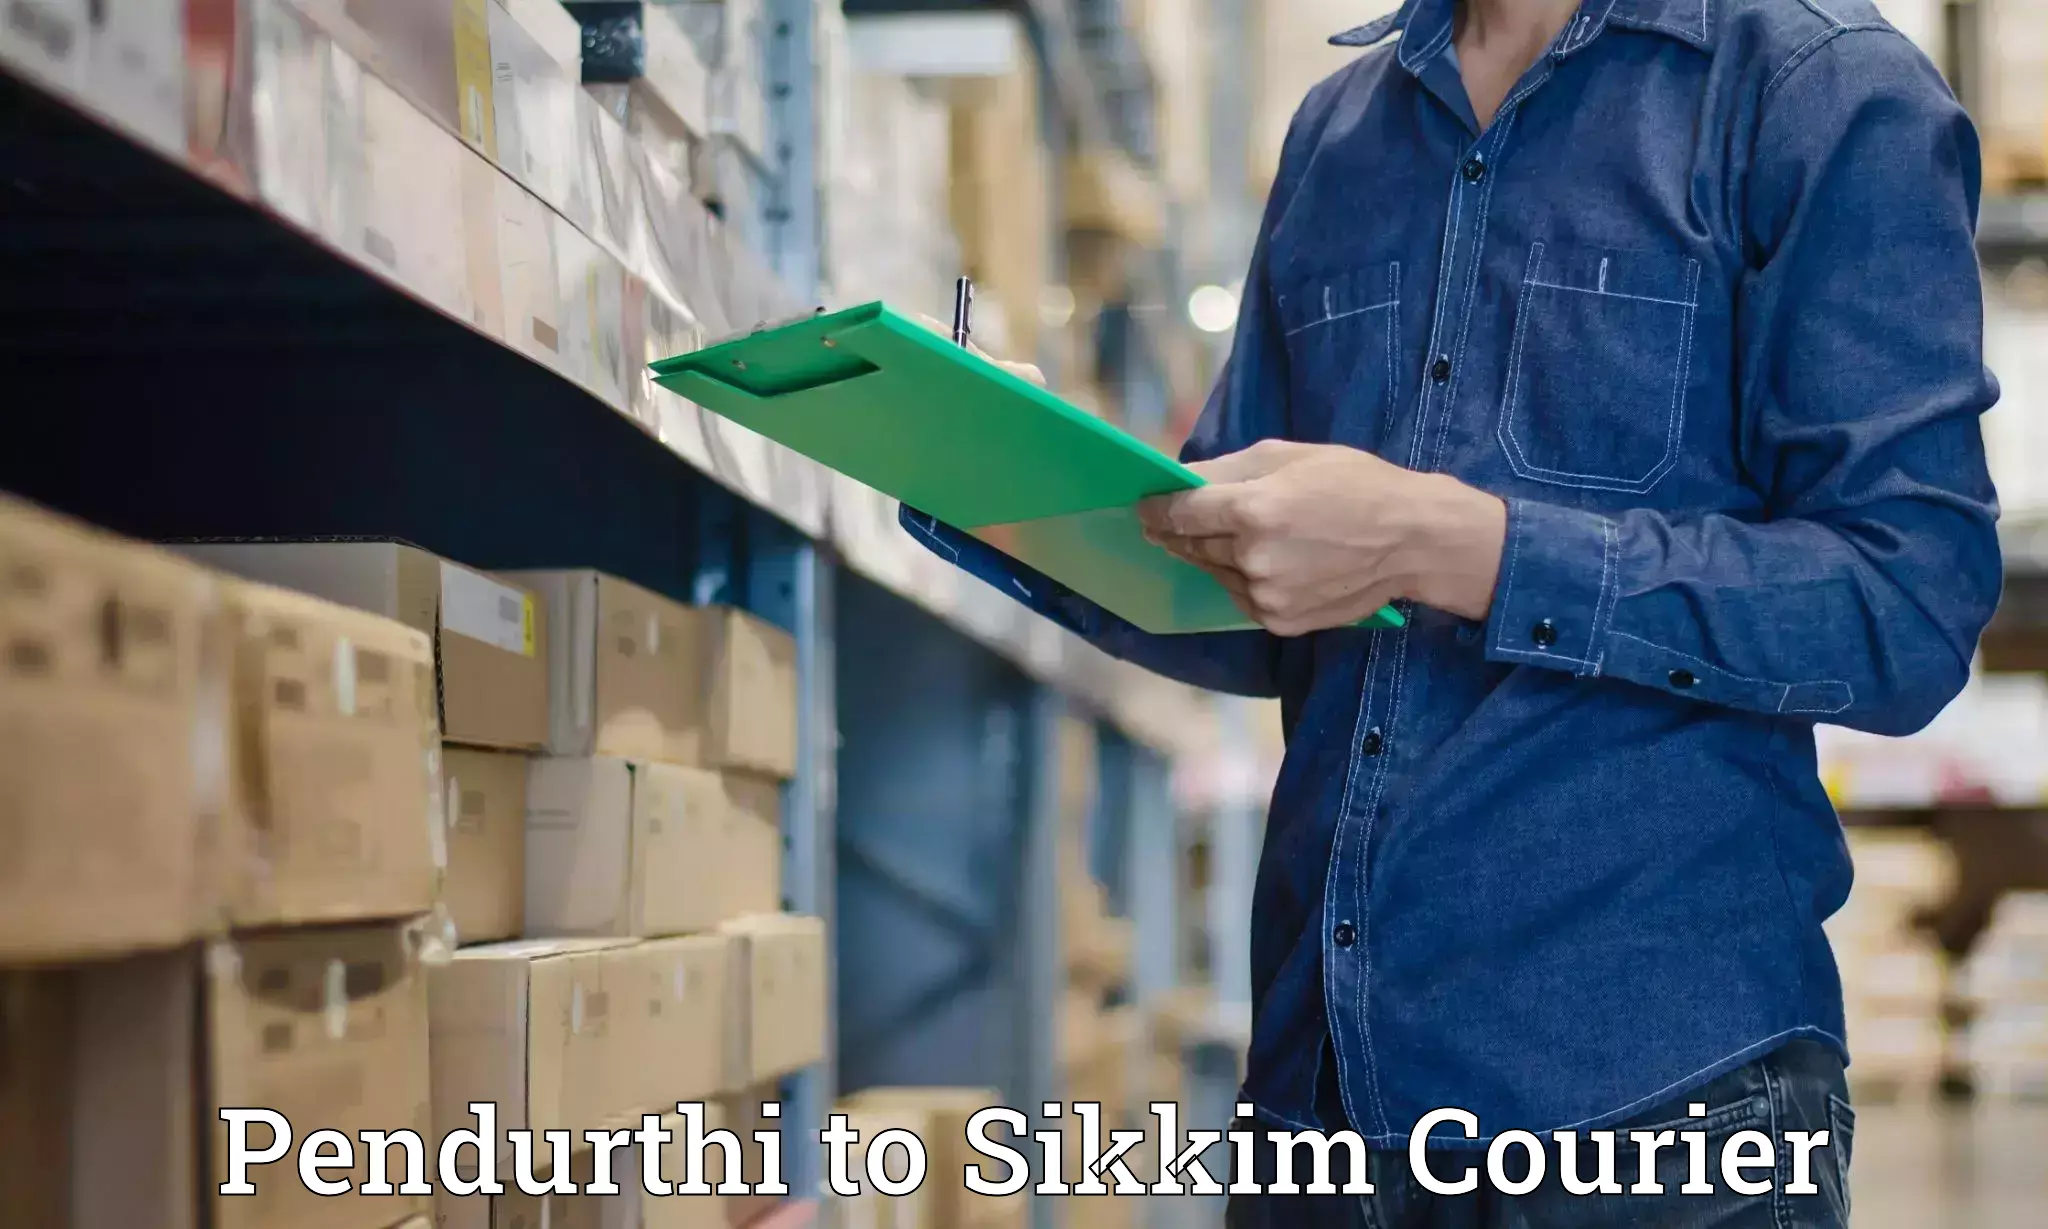 State-of-the-art courier technology Pendurthi to Gangtok